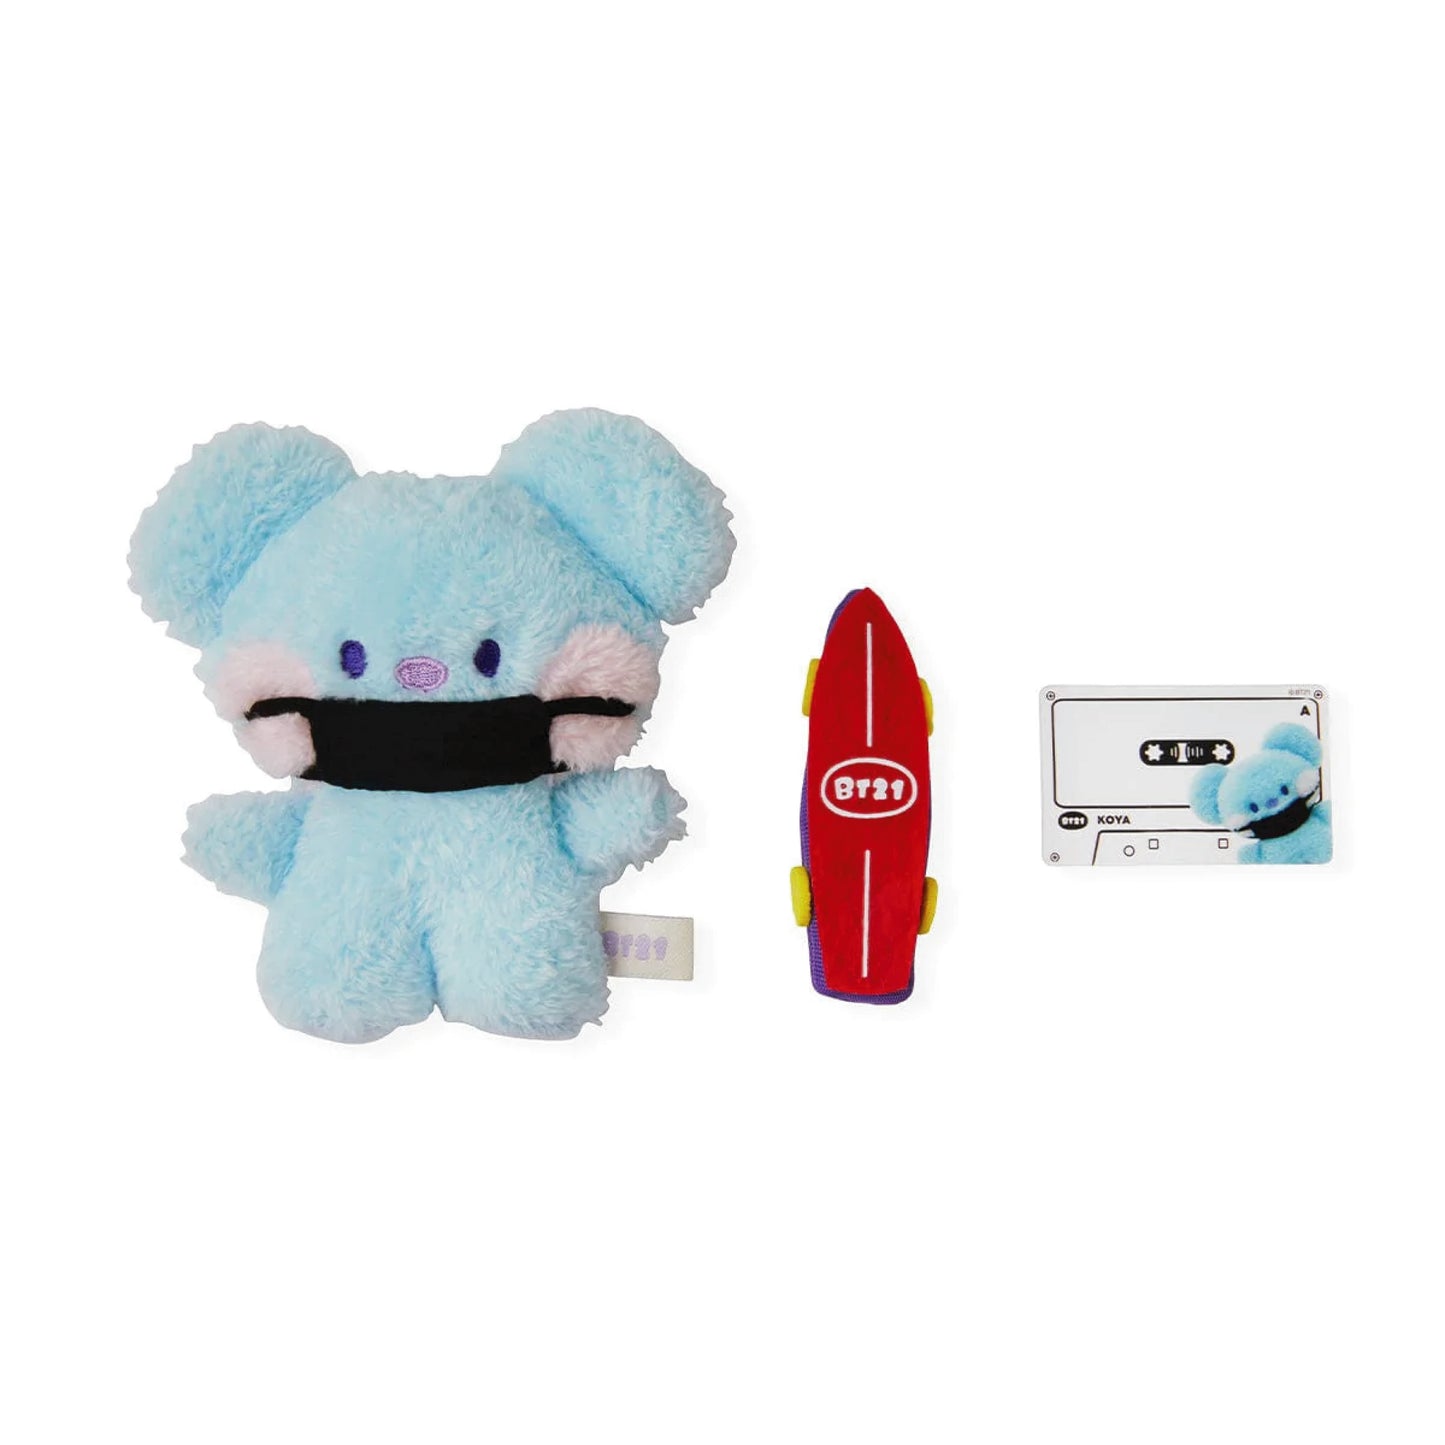 BT21 | minini | STANDING DOLL - STEREO EDITION